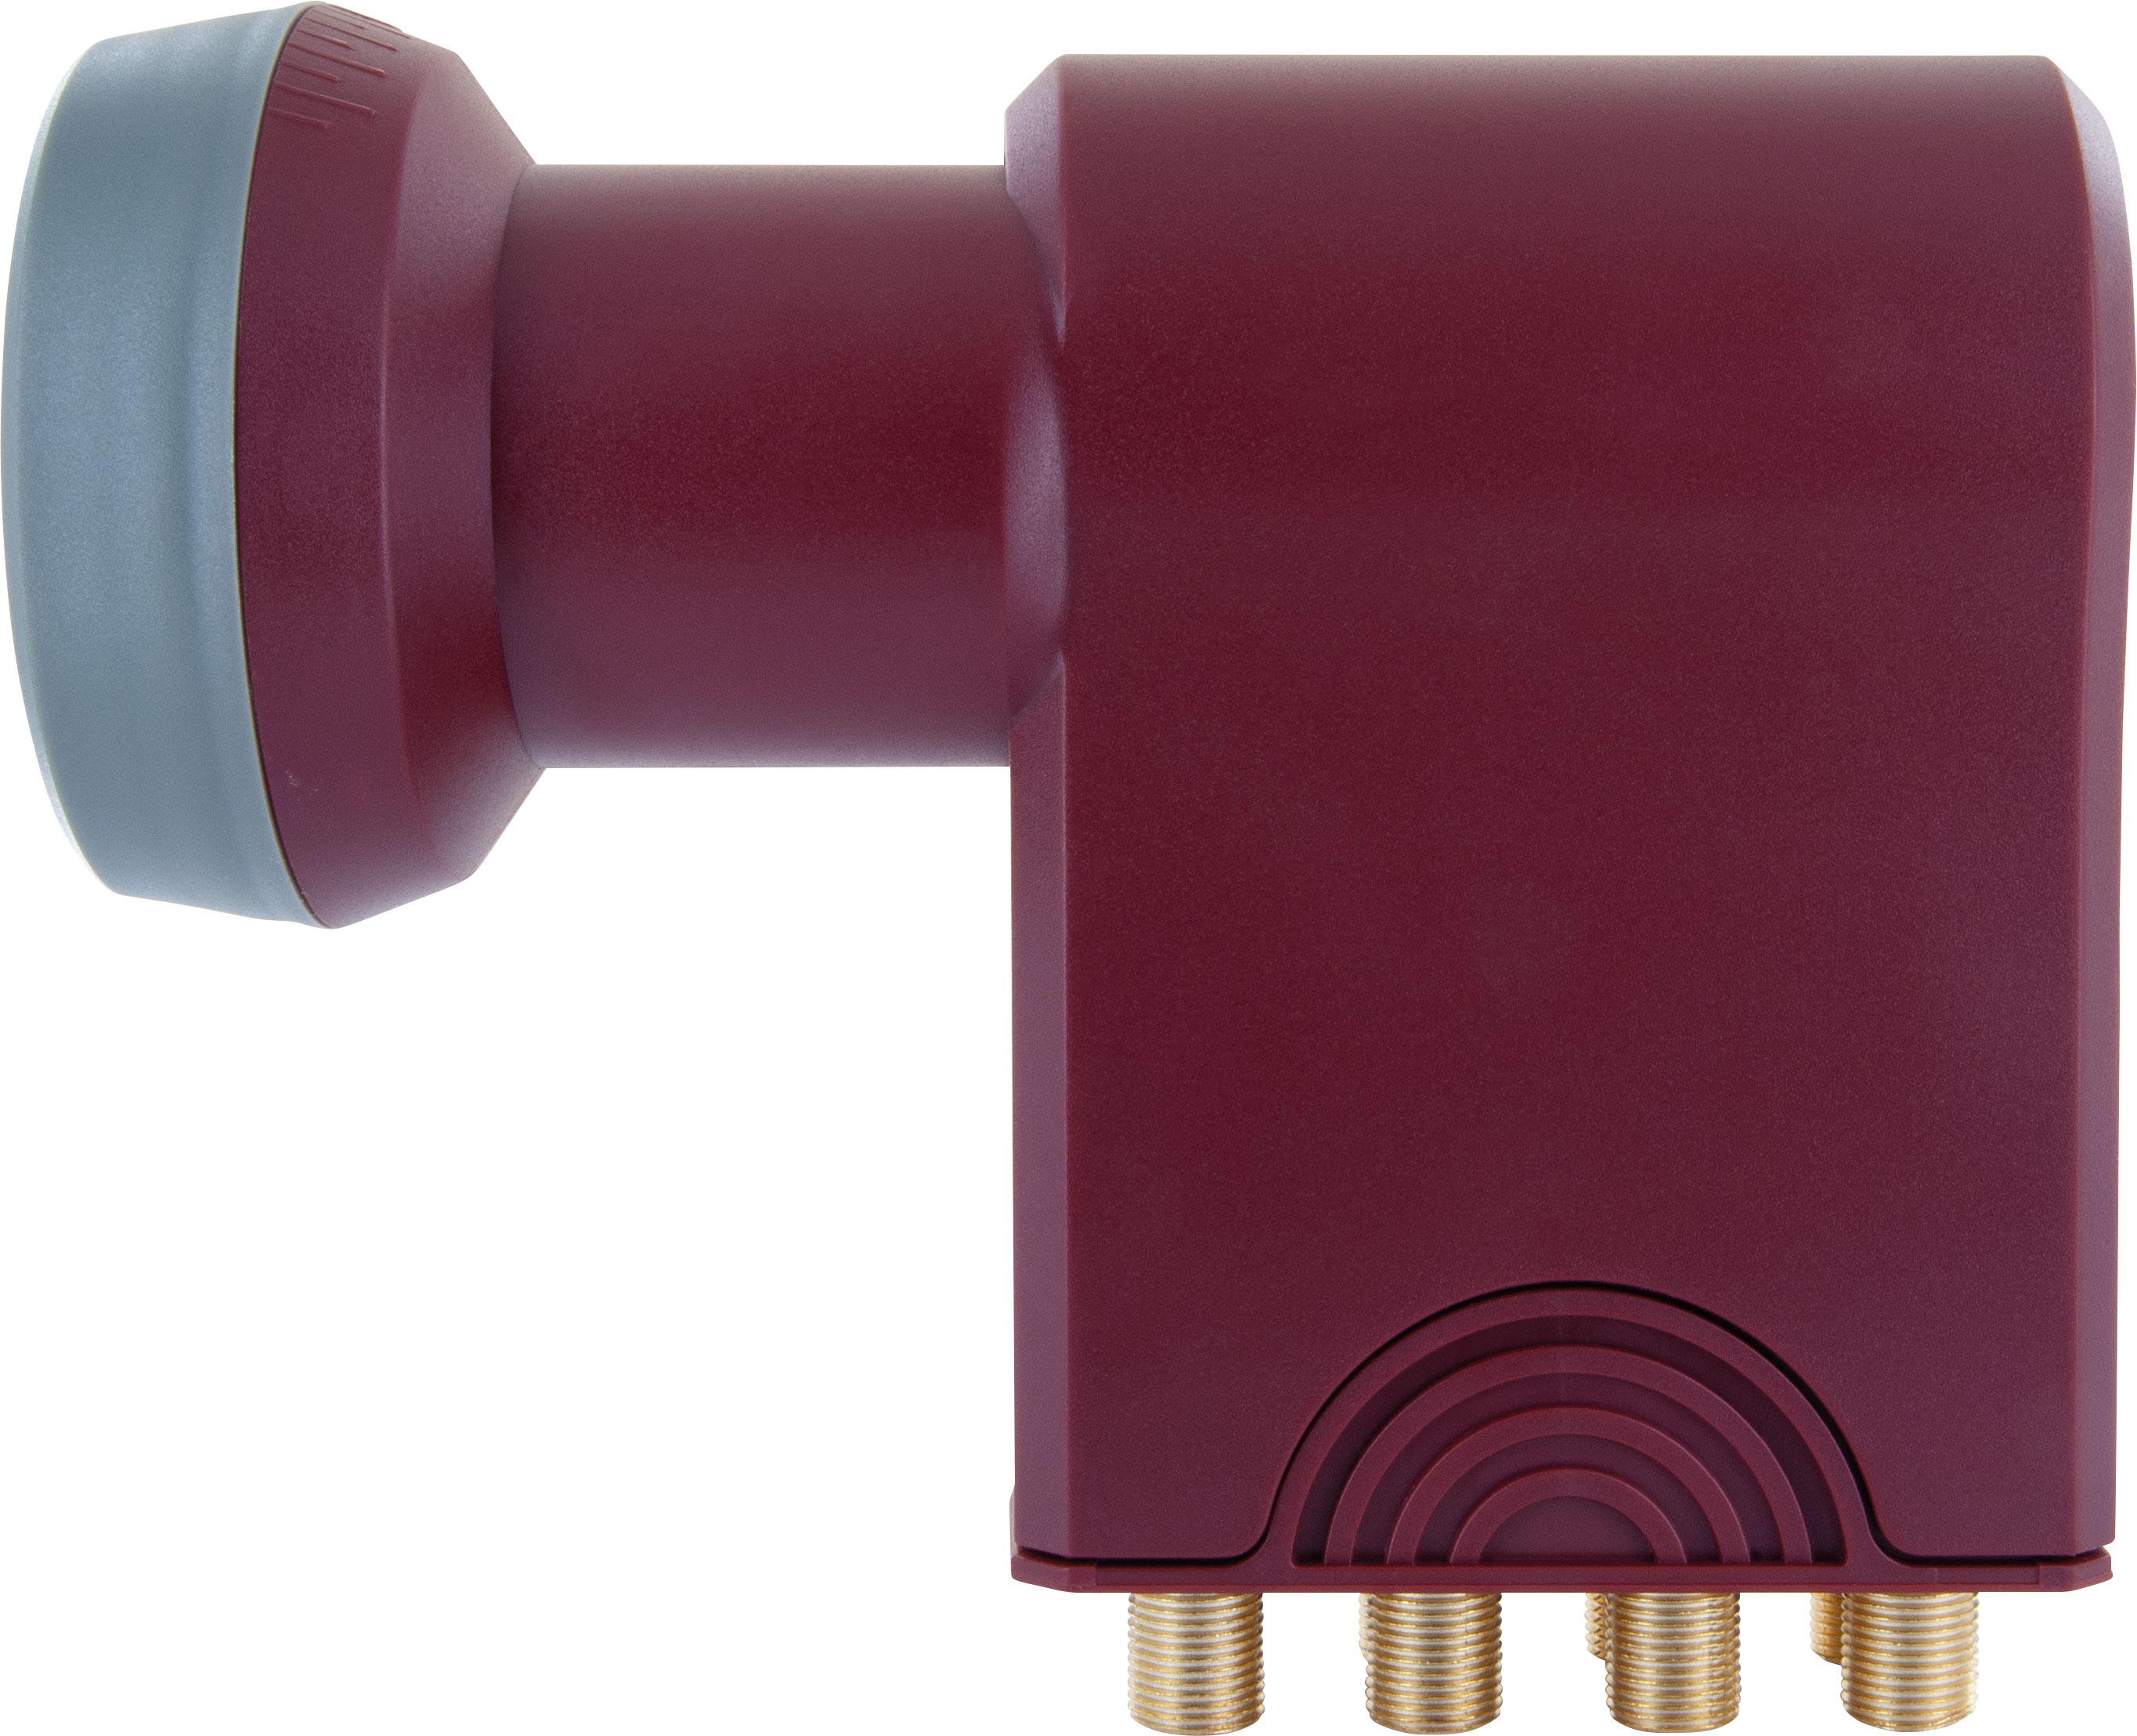 SCHWAIGER Octo Sun LNB Switch -717419- Protect